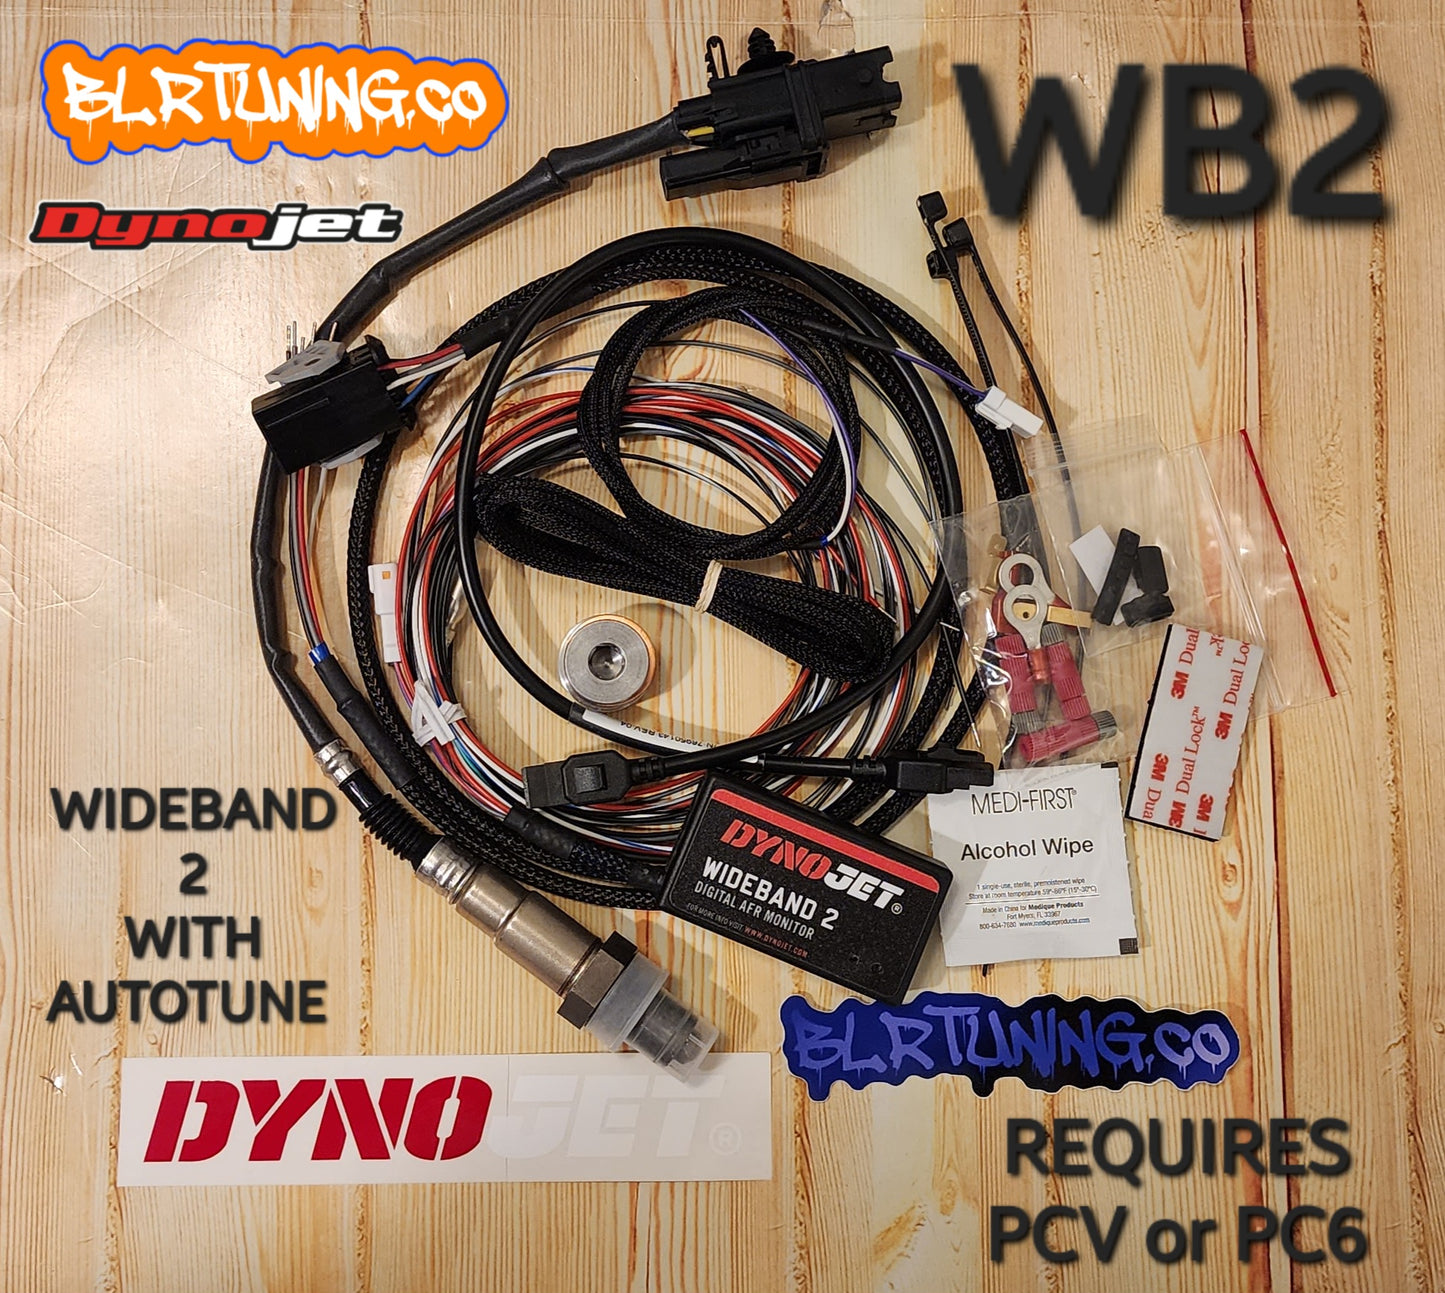 WB2 WIDE BAND 2 WITH AUTOTUNE BASE KIT FOR POWER COMMANDER PC6 PCV